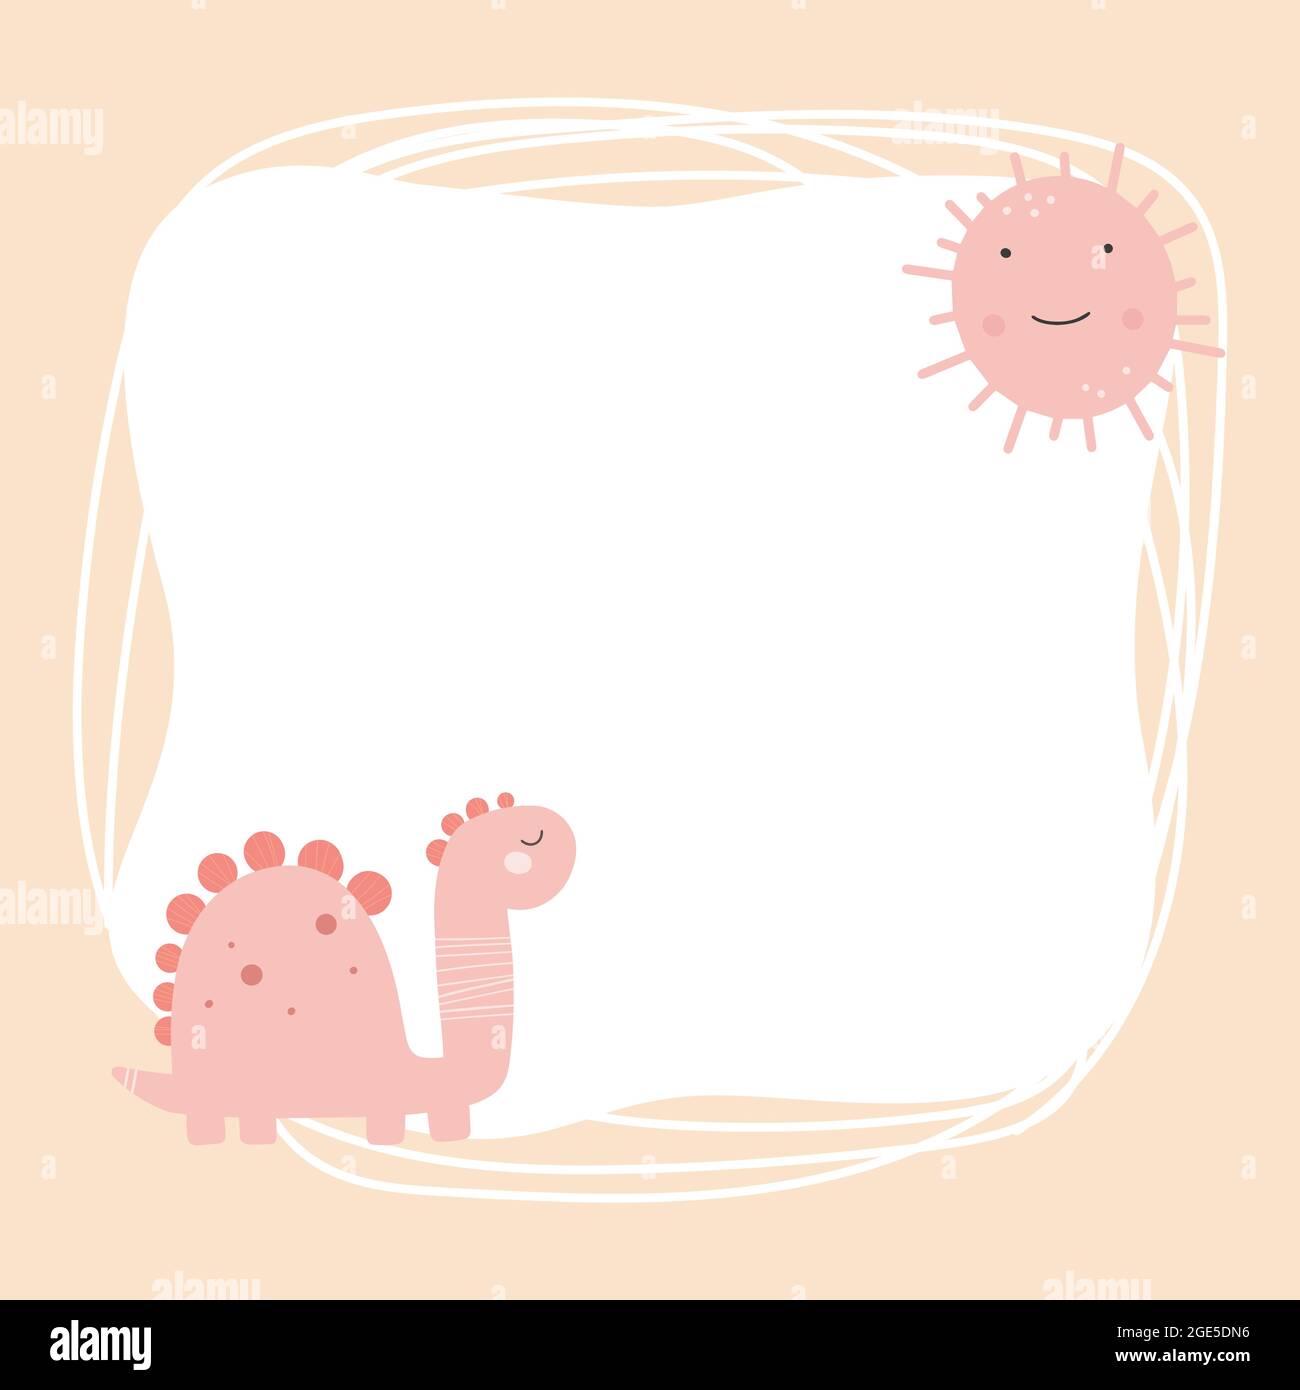 Cute dinosaur with a blot frame in simple cartoon hand-drawn style. Template for your text or photo. Ideal for cards, invitations, party, kindergarten Stock Vector